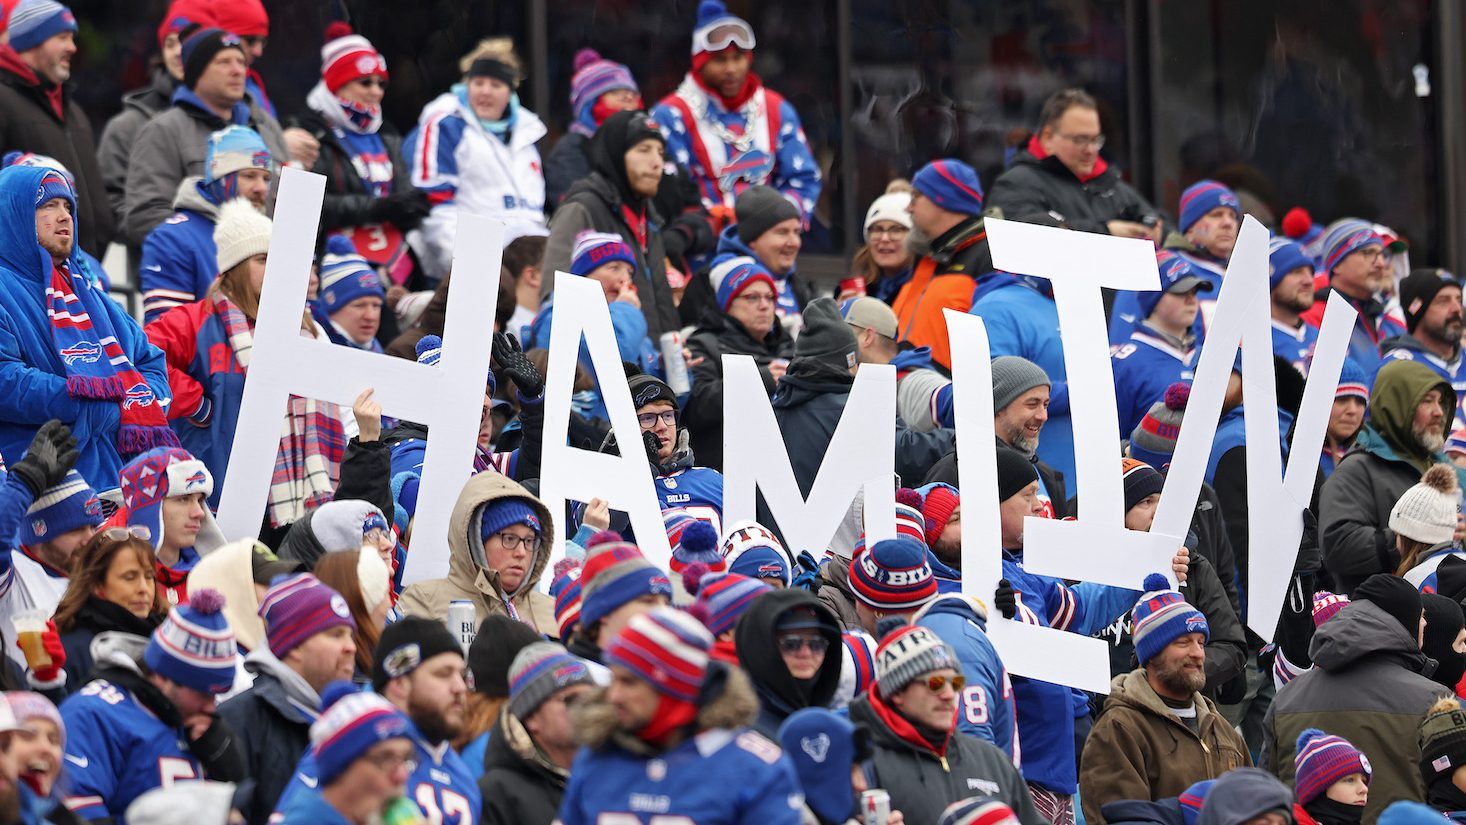 Buffalo Bills fans hold signs in support of Buffalo Bills safety Damar Hamlin during a game against the New England Patriots. (Photo by Bryan M. Bennett/Getty Images)